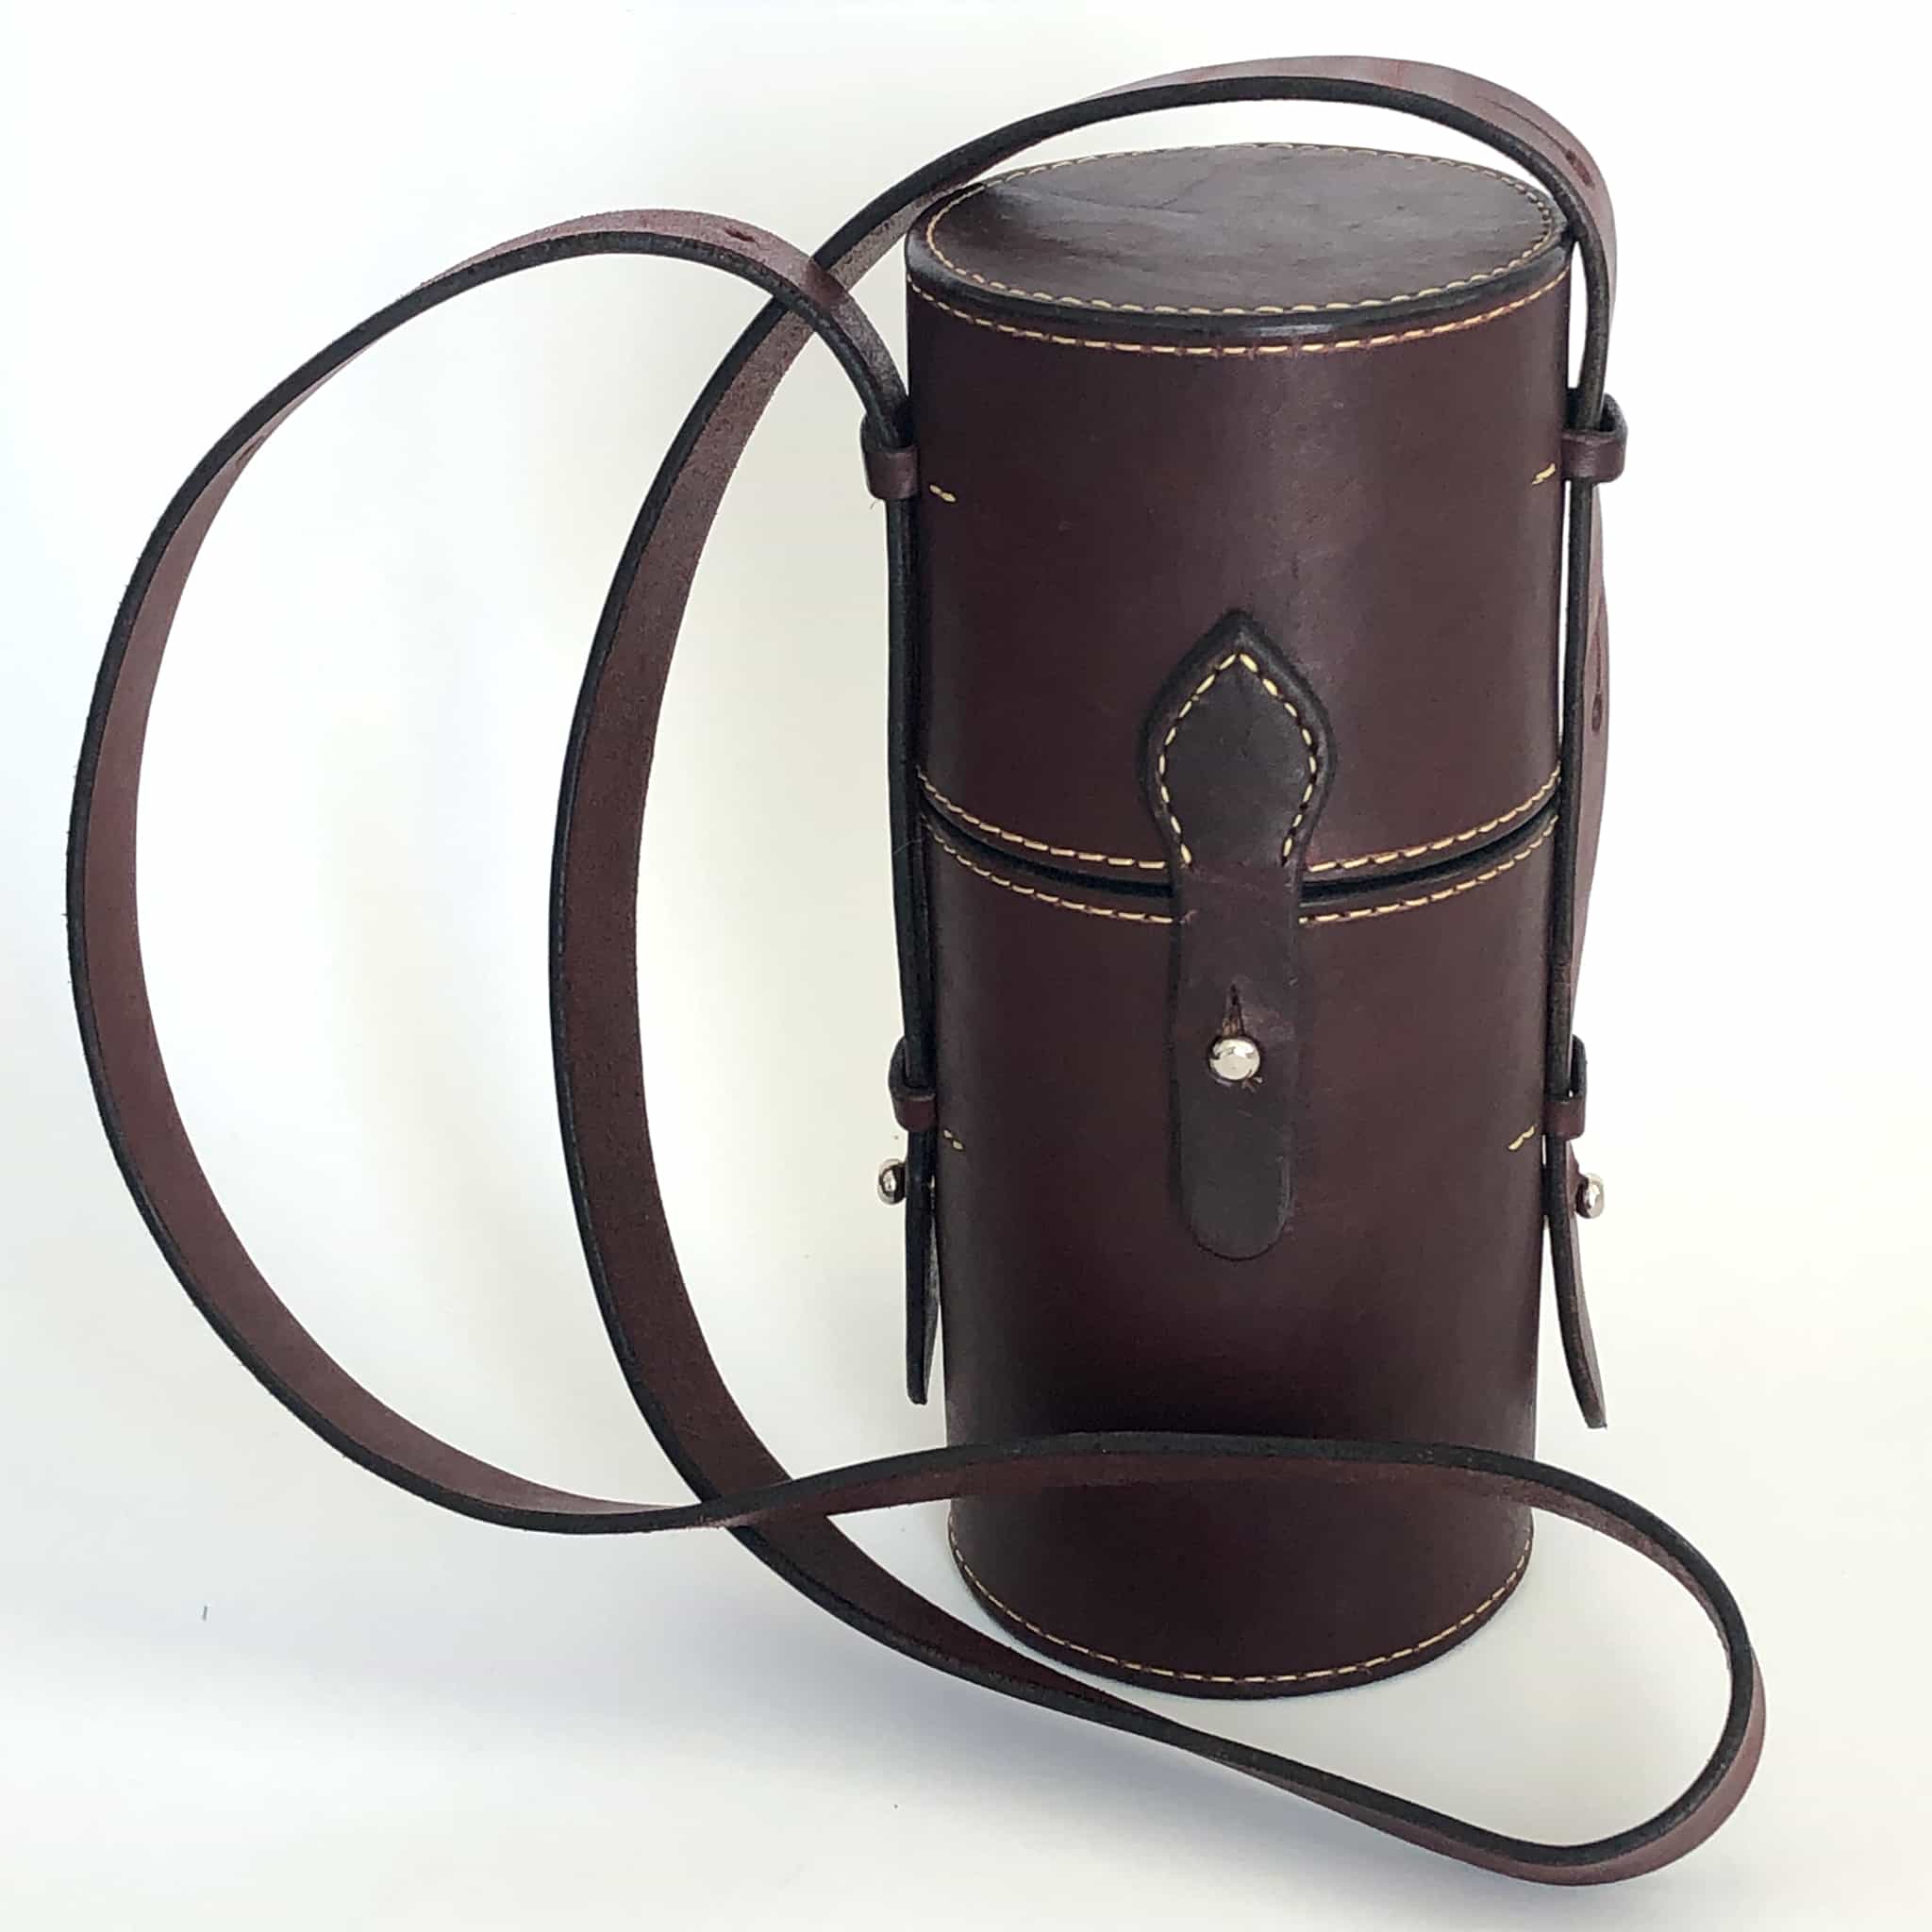 Burgundy latigo leather thermos case with 12 ounce thermos case closed from the front